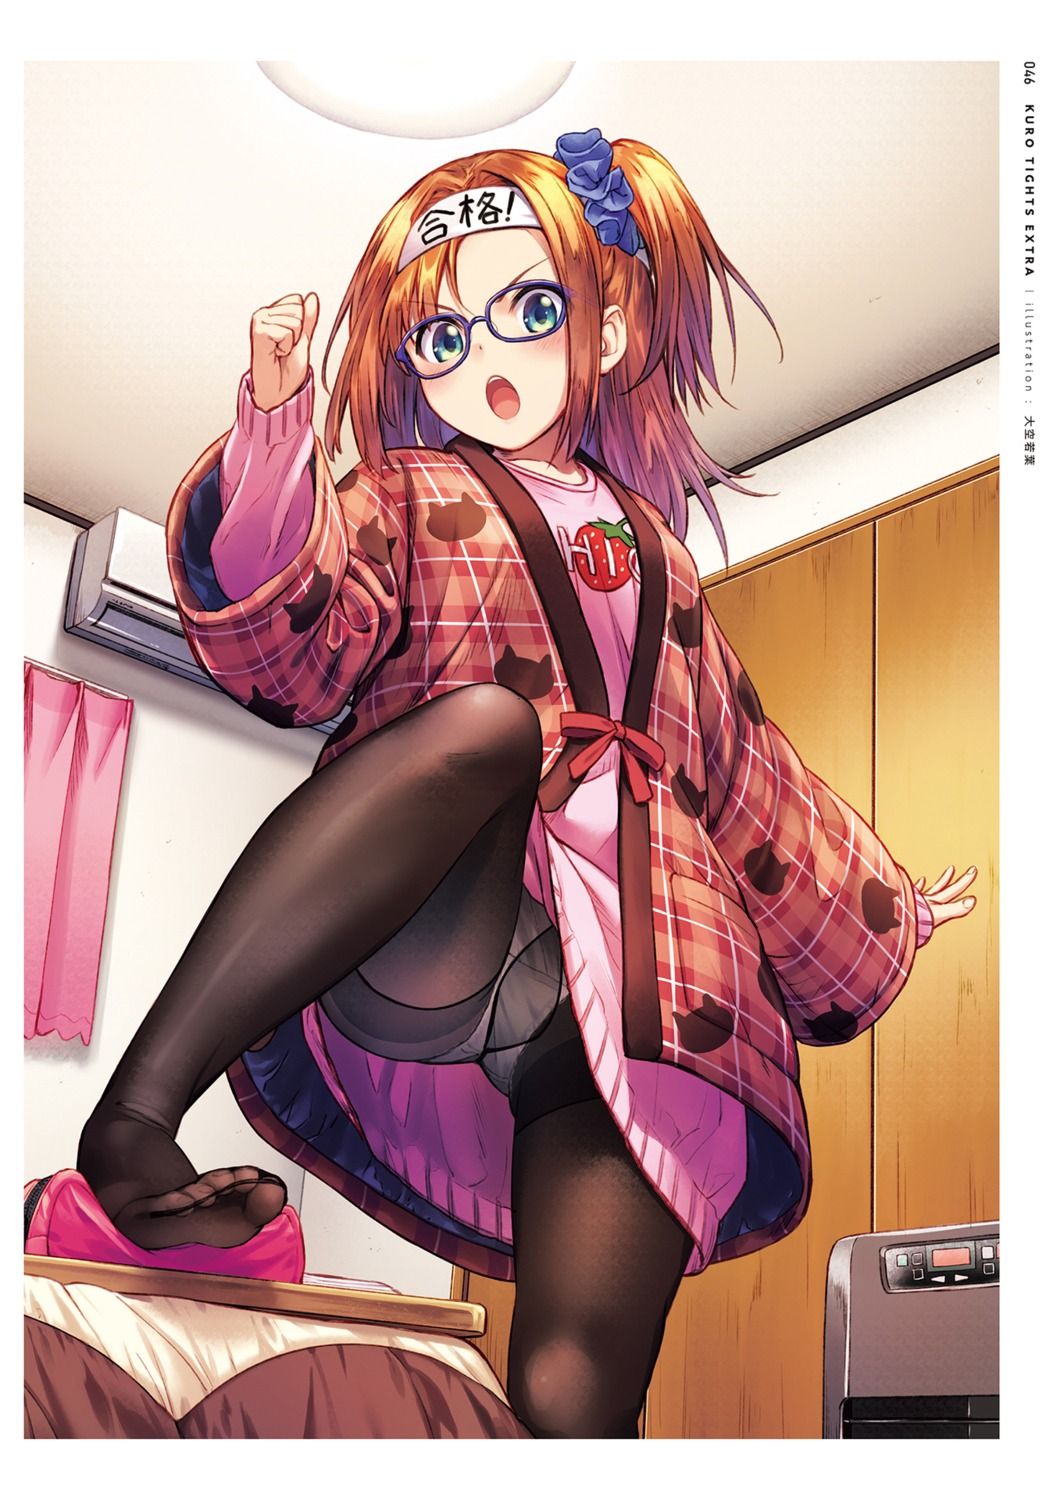 【2nd】Erotic image of a girl wearing glasses Part 44 18